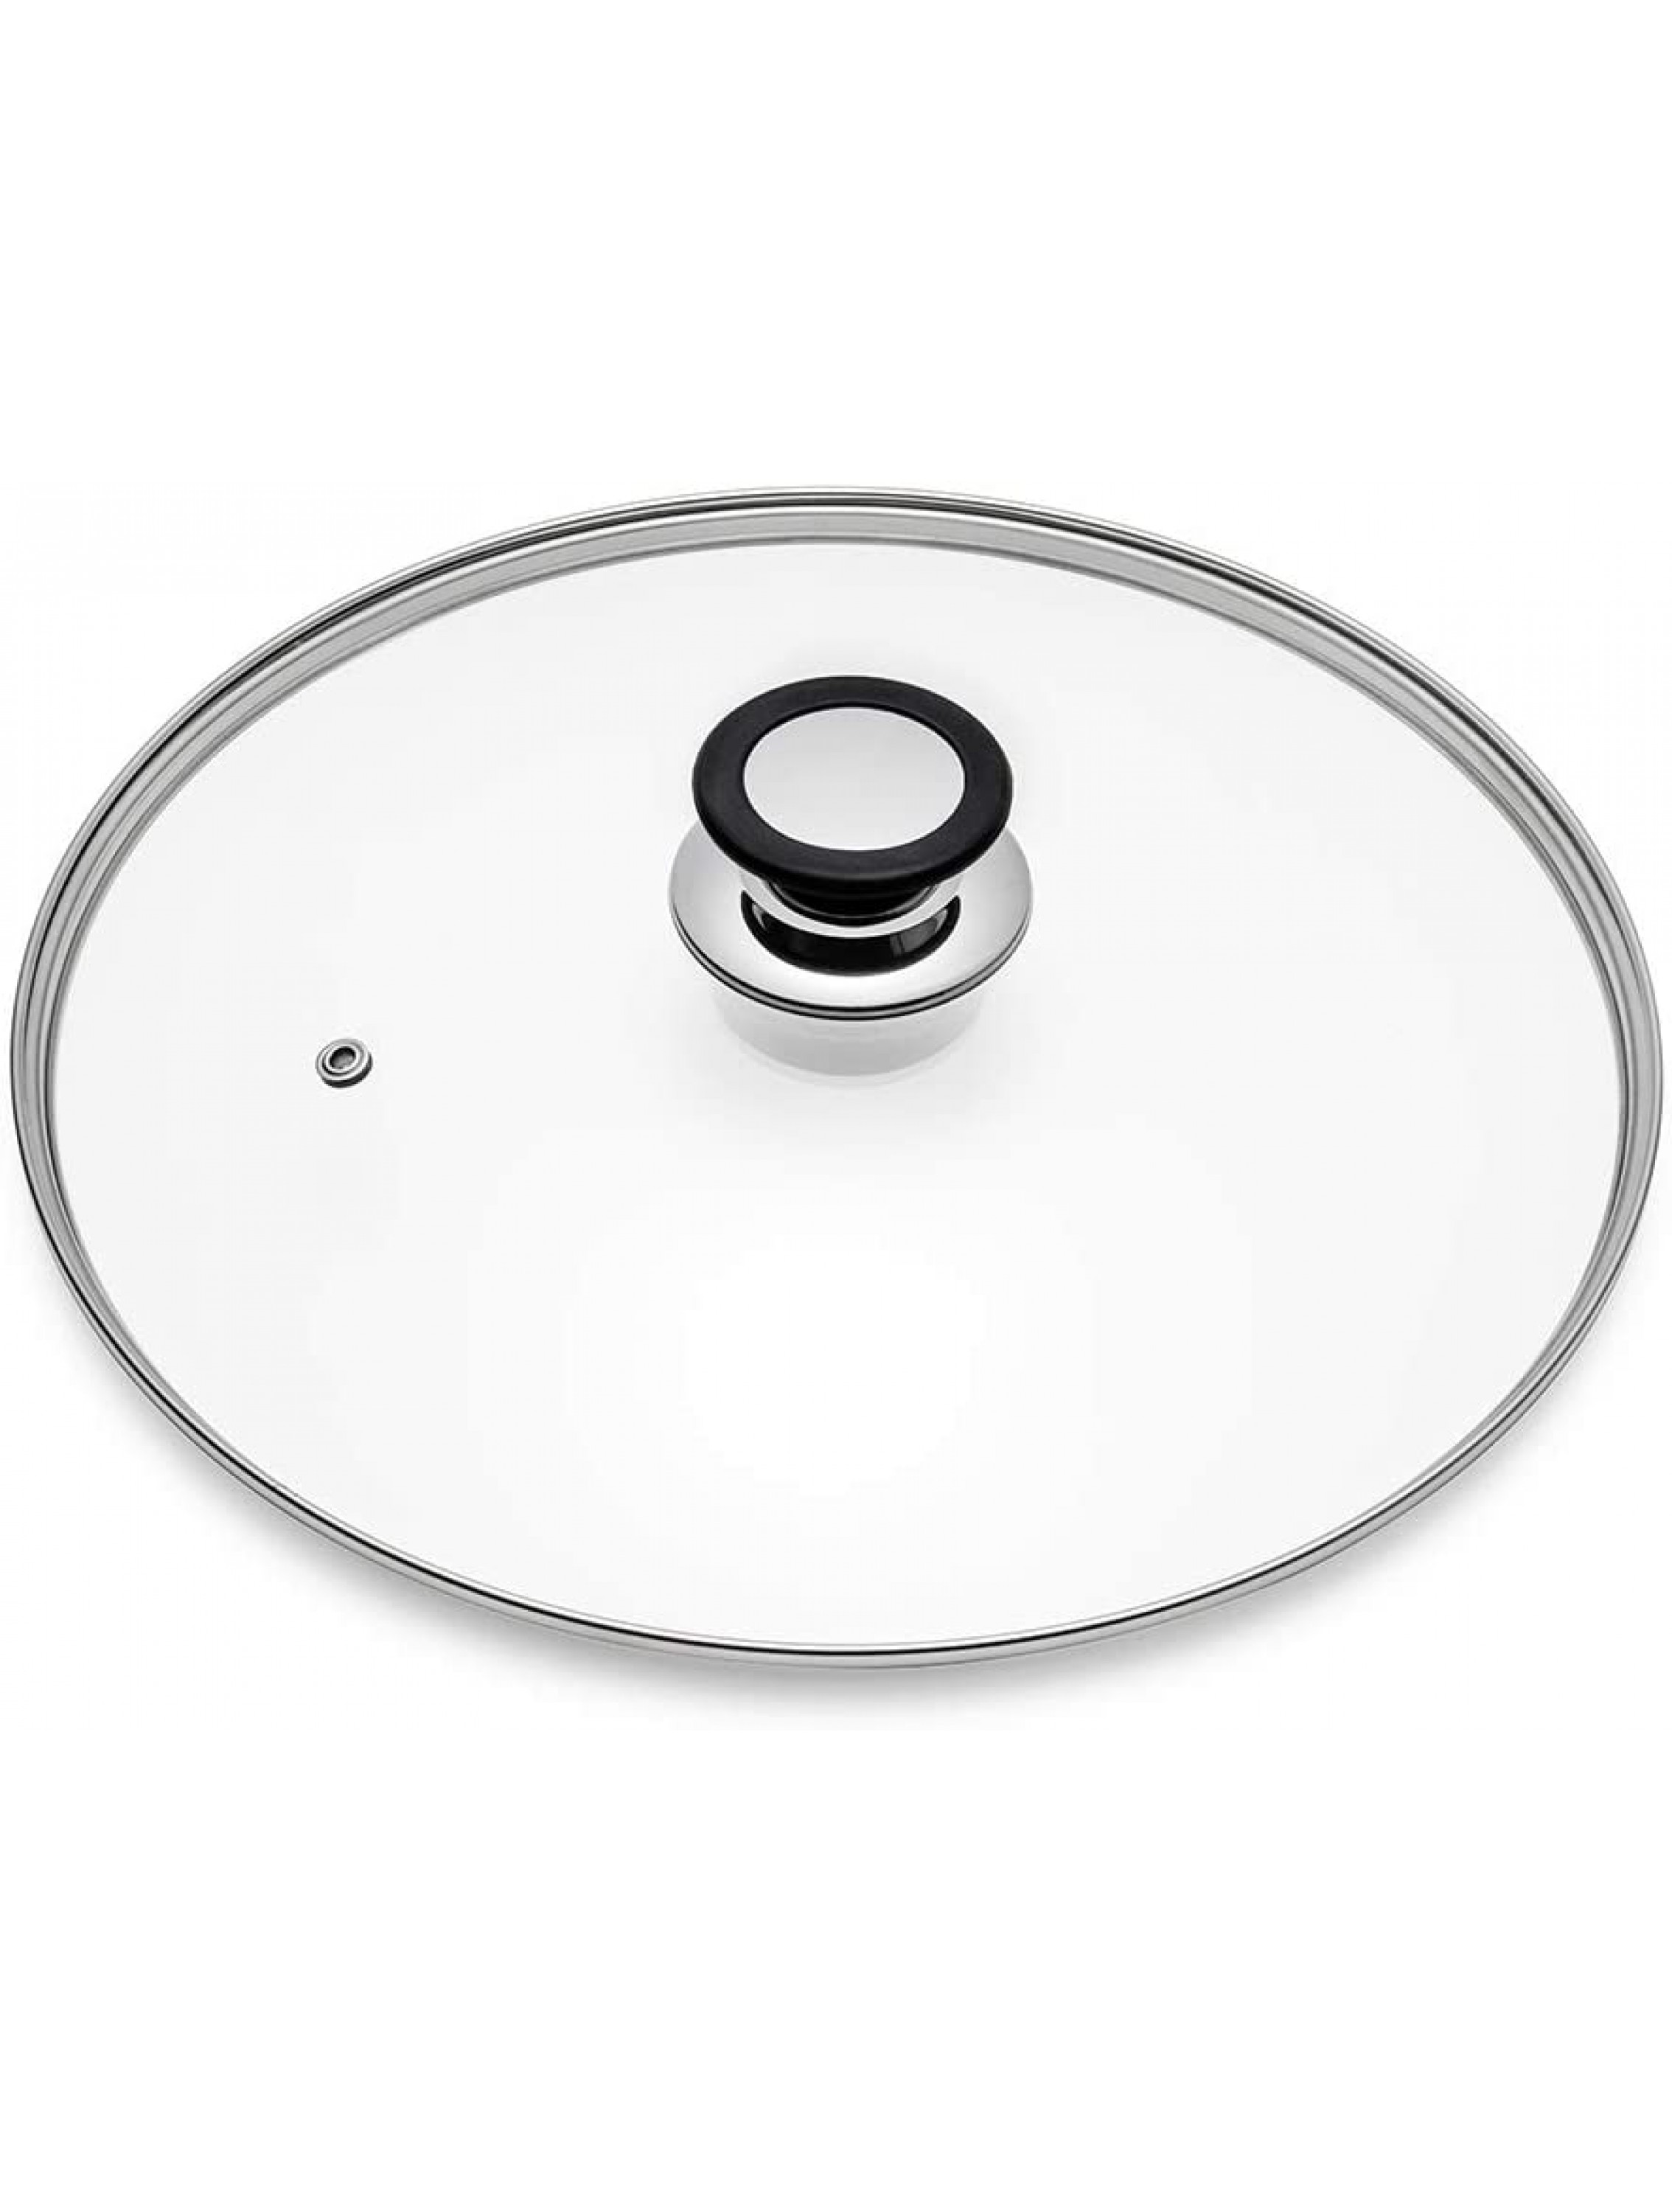 Glass Lid for Frying Pan Fry Pan Skillet Pan Lid with Handle Coated in Silicone Ring,10.5 26cm Clear - B6TT182VA